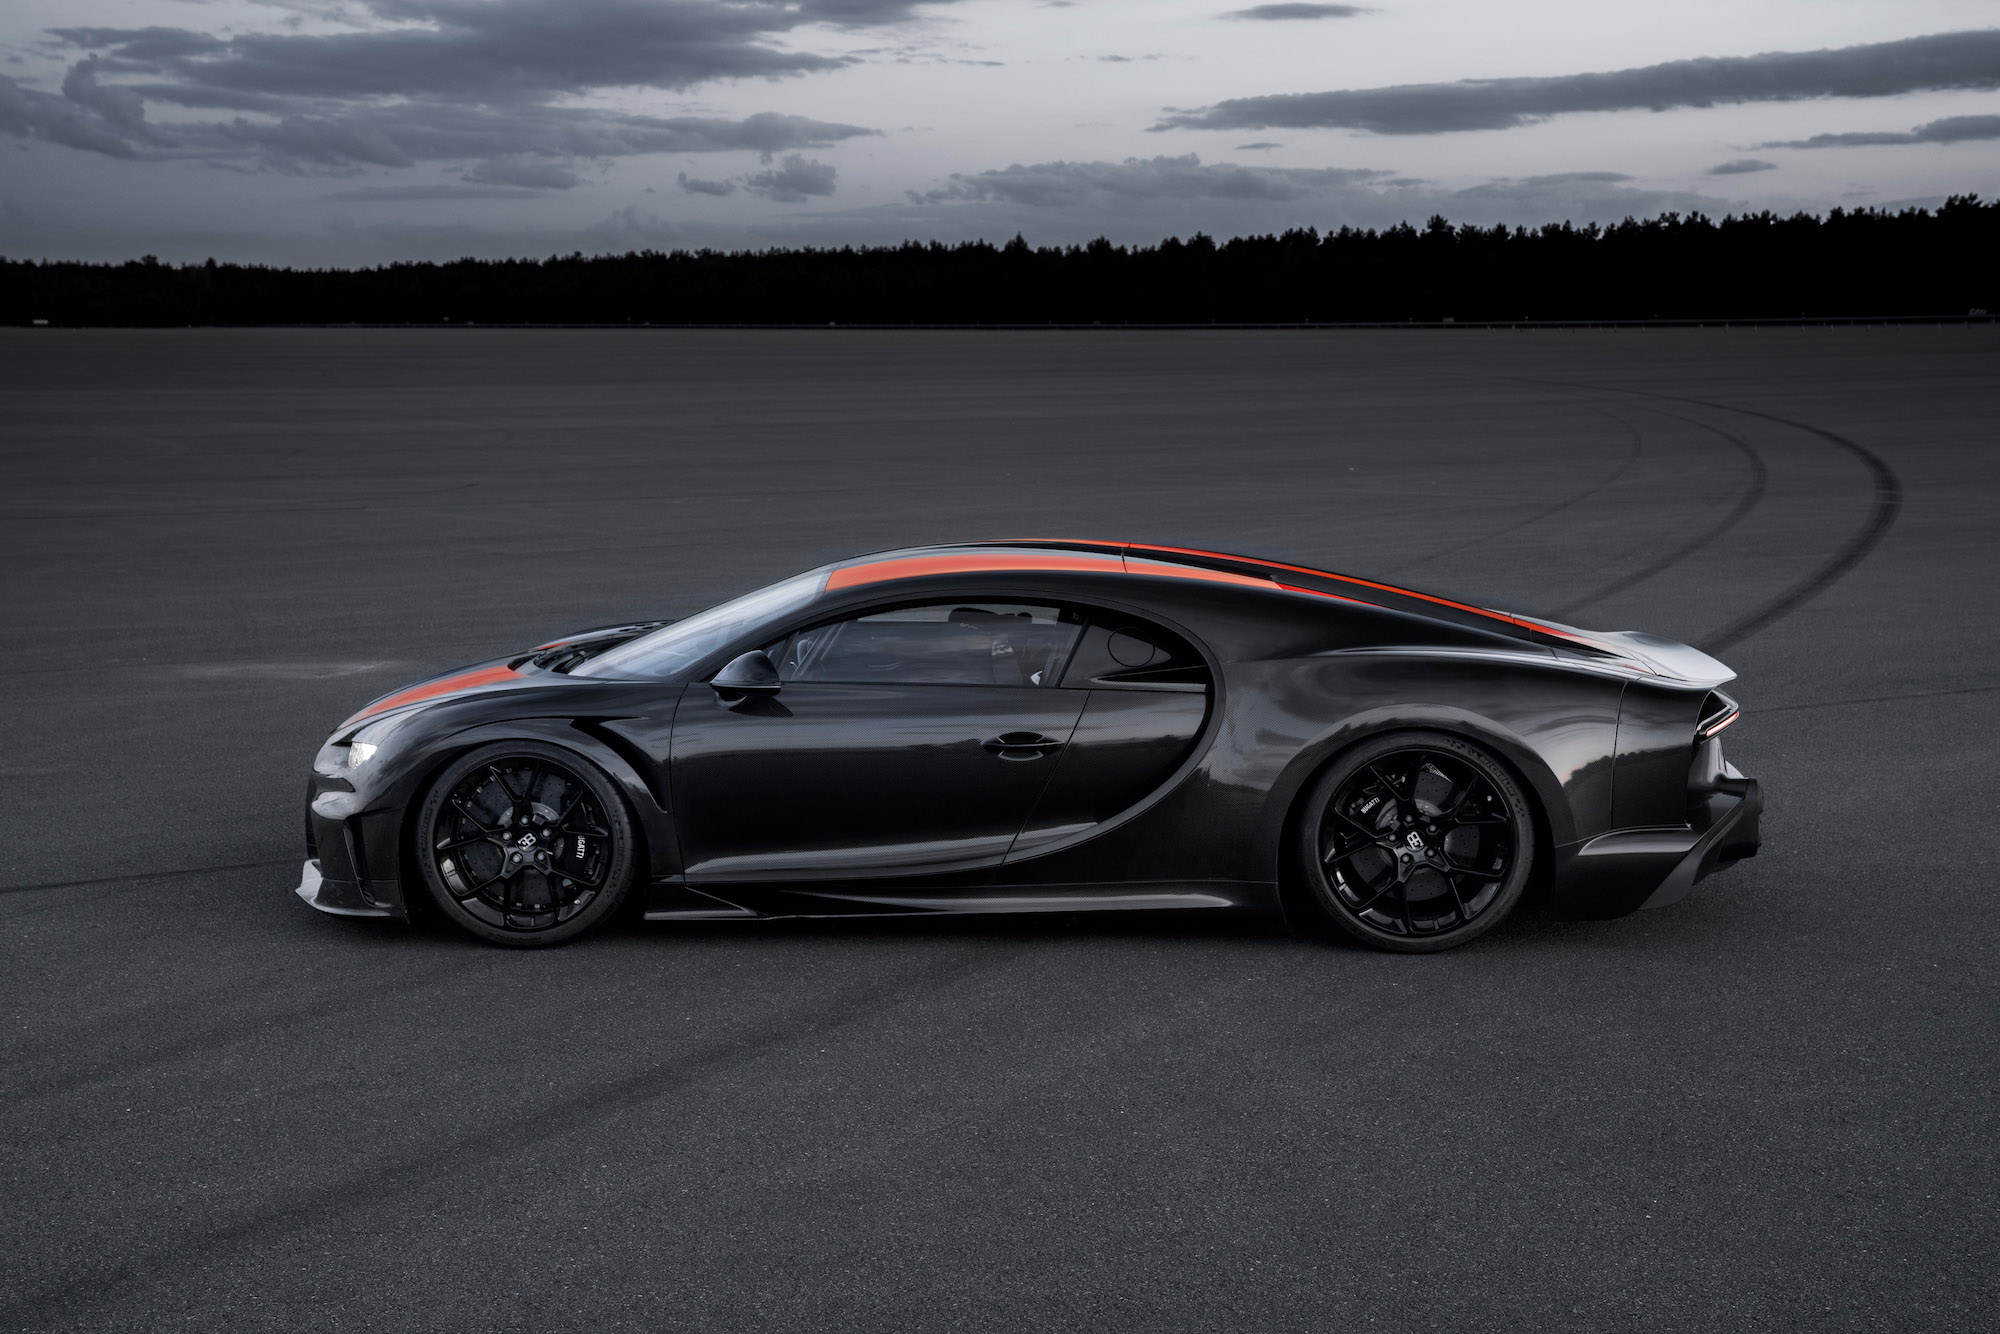 A black-and-red Bugatti Chiron Super Sport 300+ parked on a large slab of asphalt